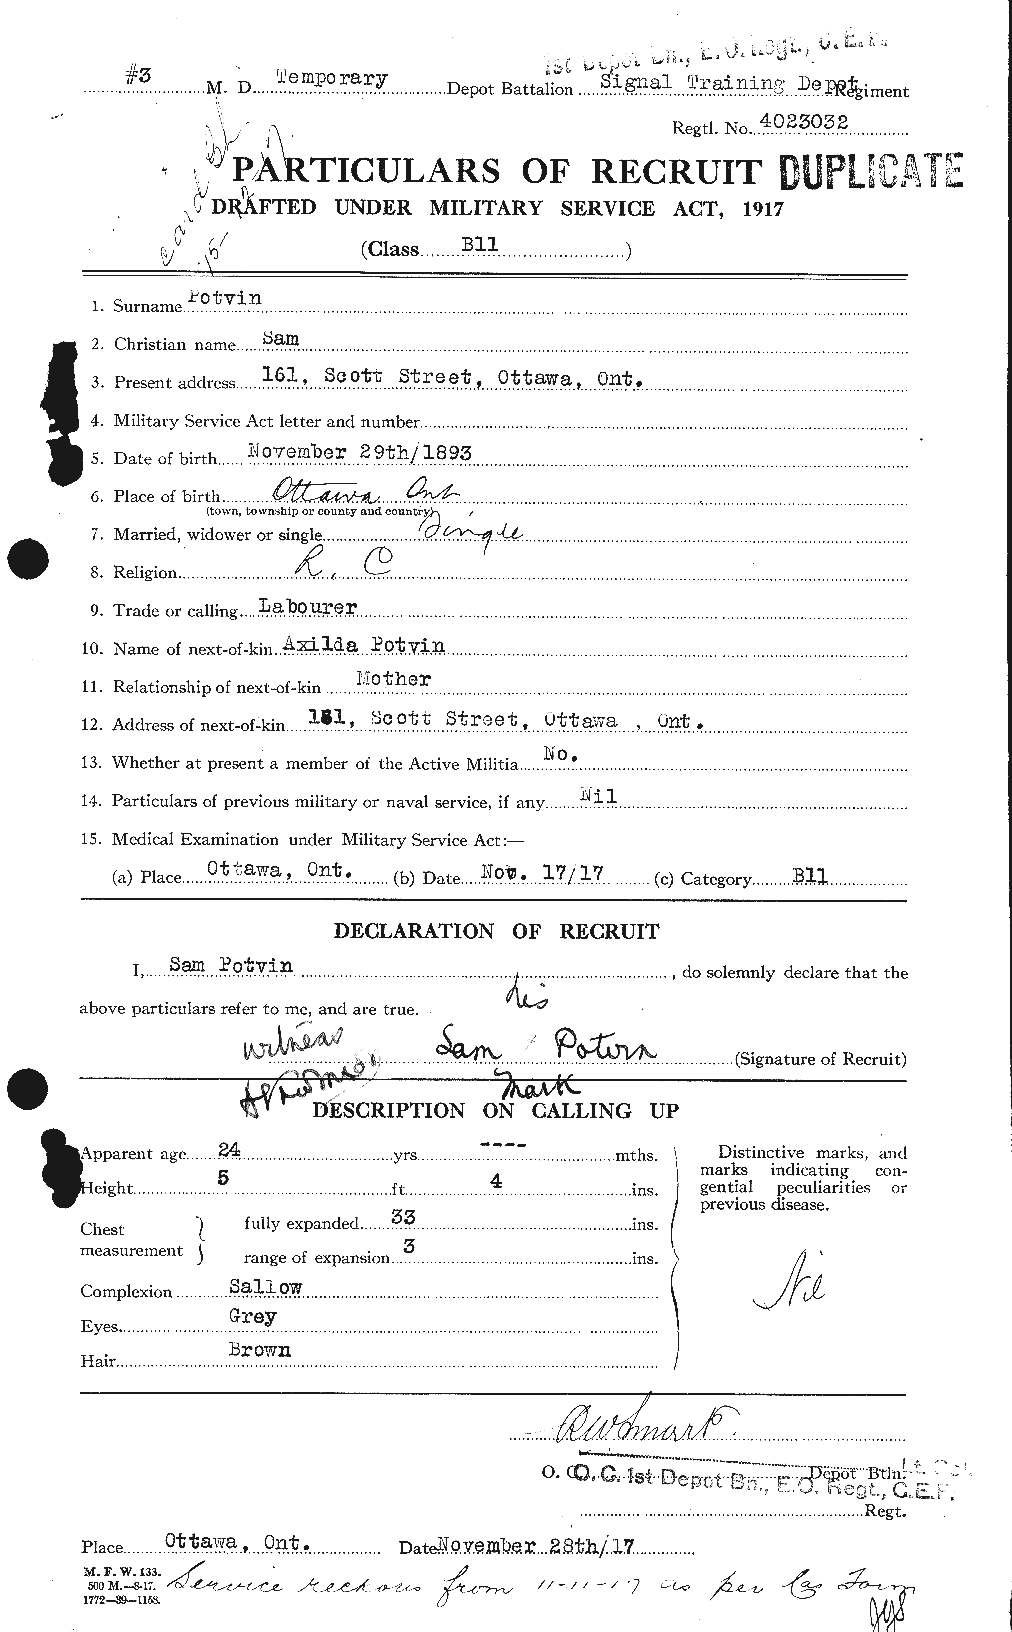 Personnel Records of the First World War - CEF 584669a